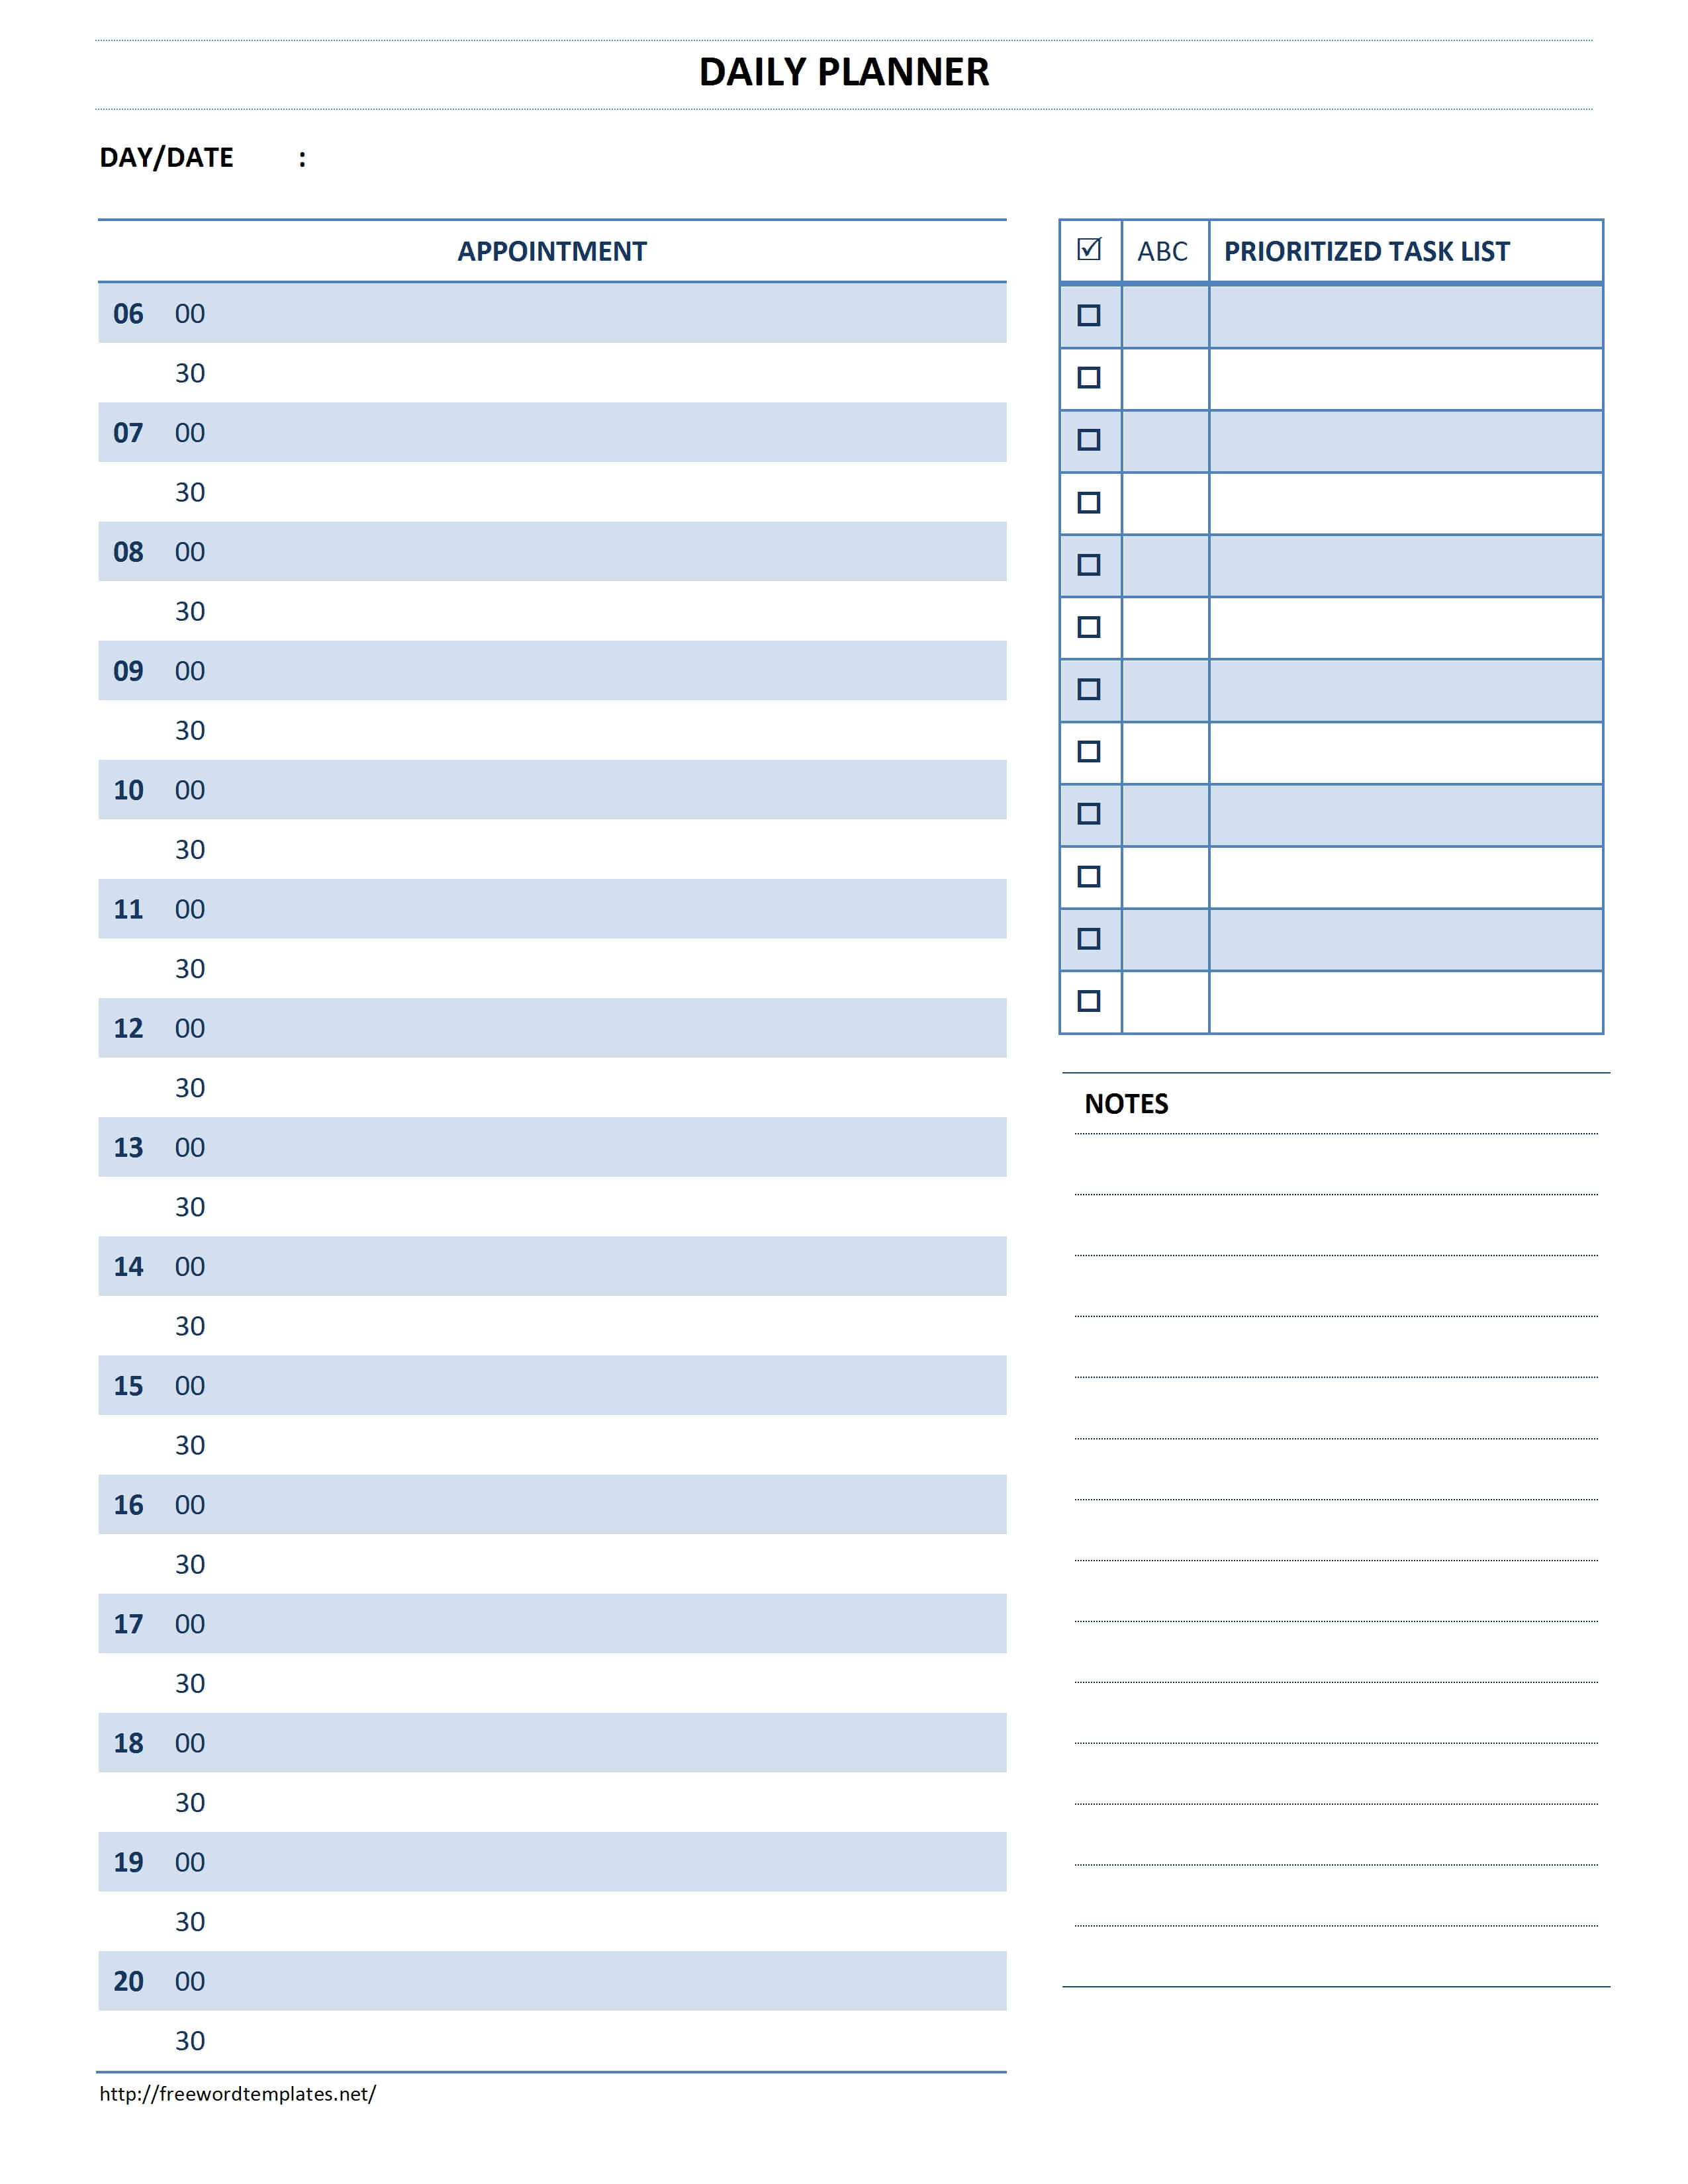 Daily Planner Template Intended For Appointment Sheet Template Word